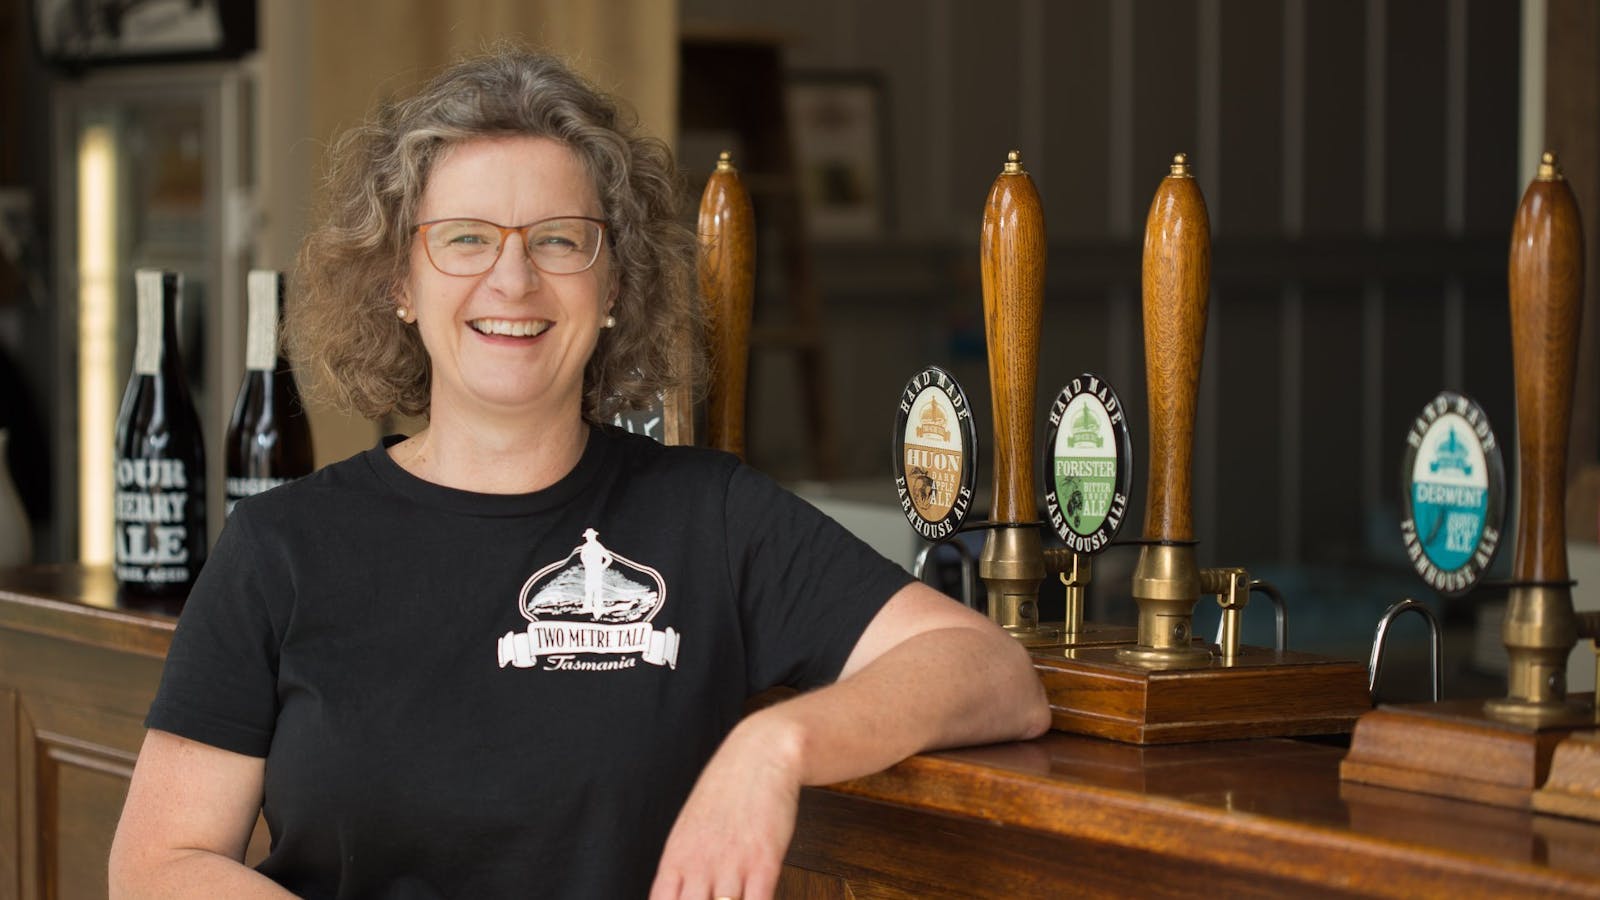 Owner, Jane Huntington will be there to welcome you at the Farm Bar & cellar door.